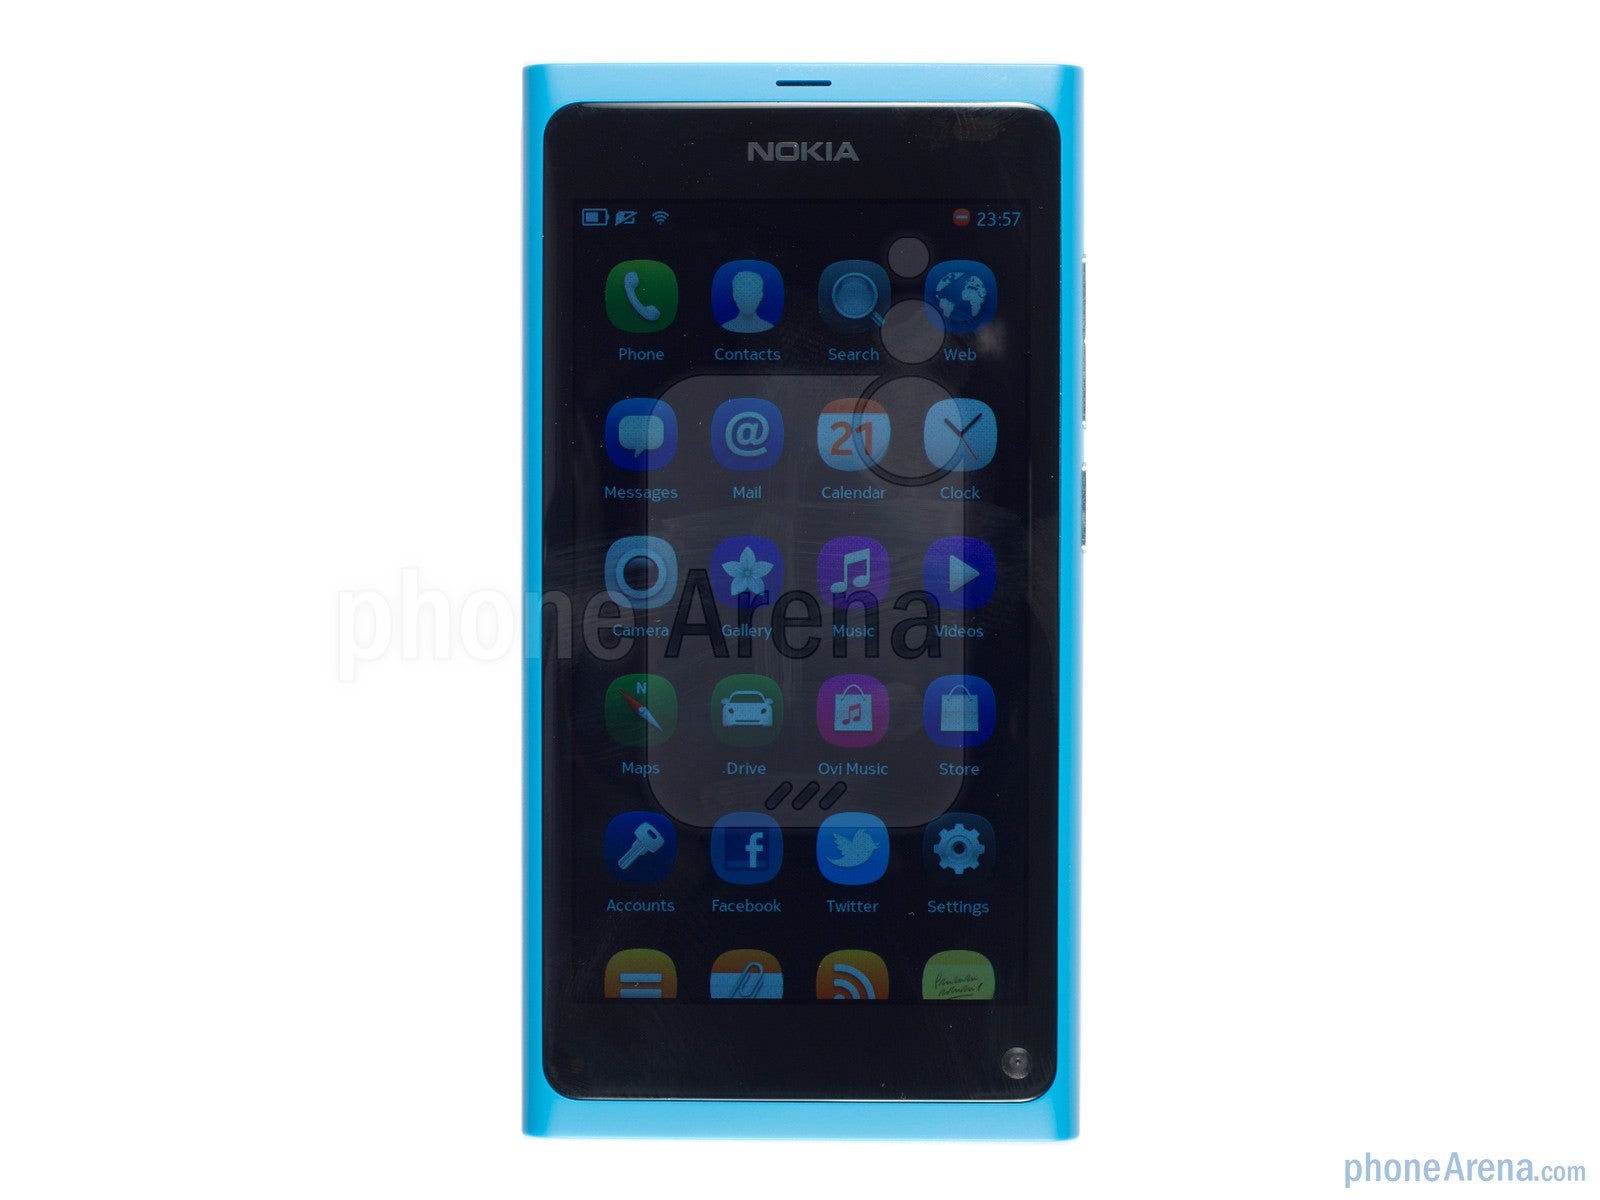 3.9-inch Clear Black AMOLED - Nokia N9 Review